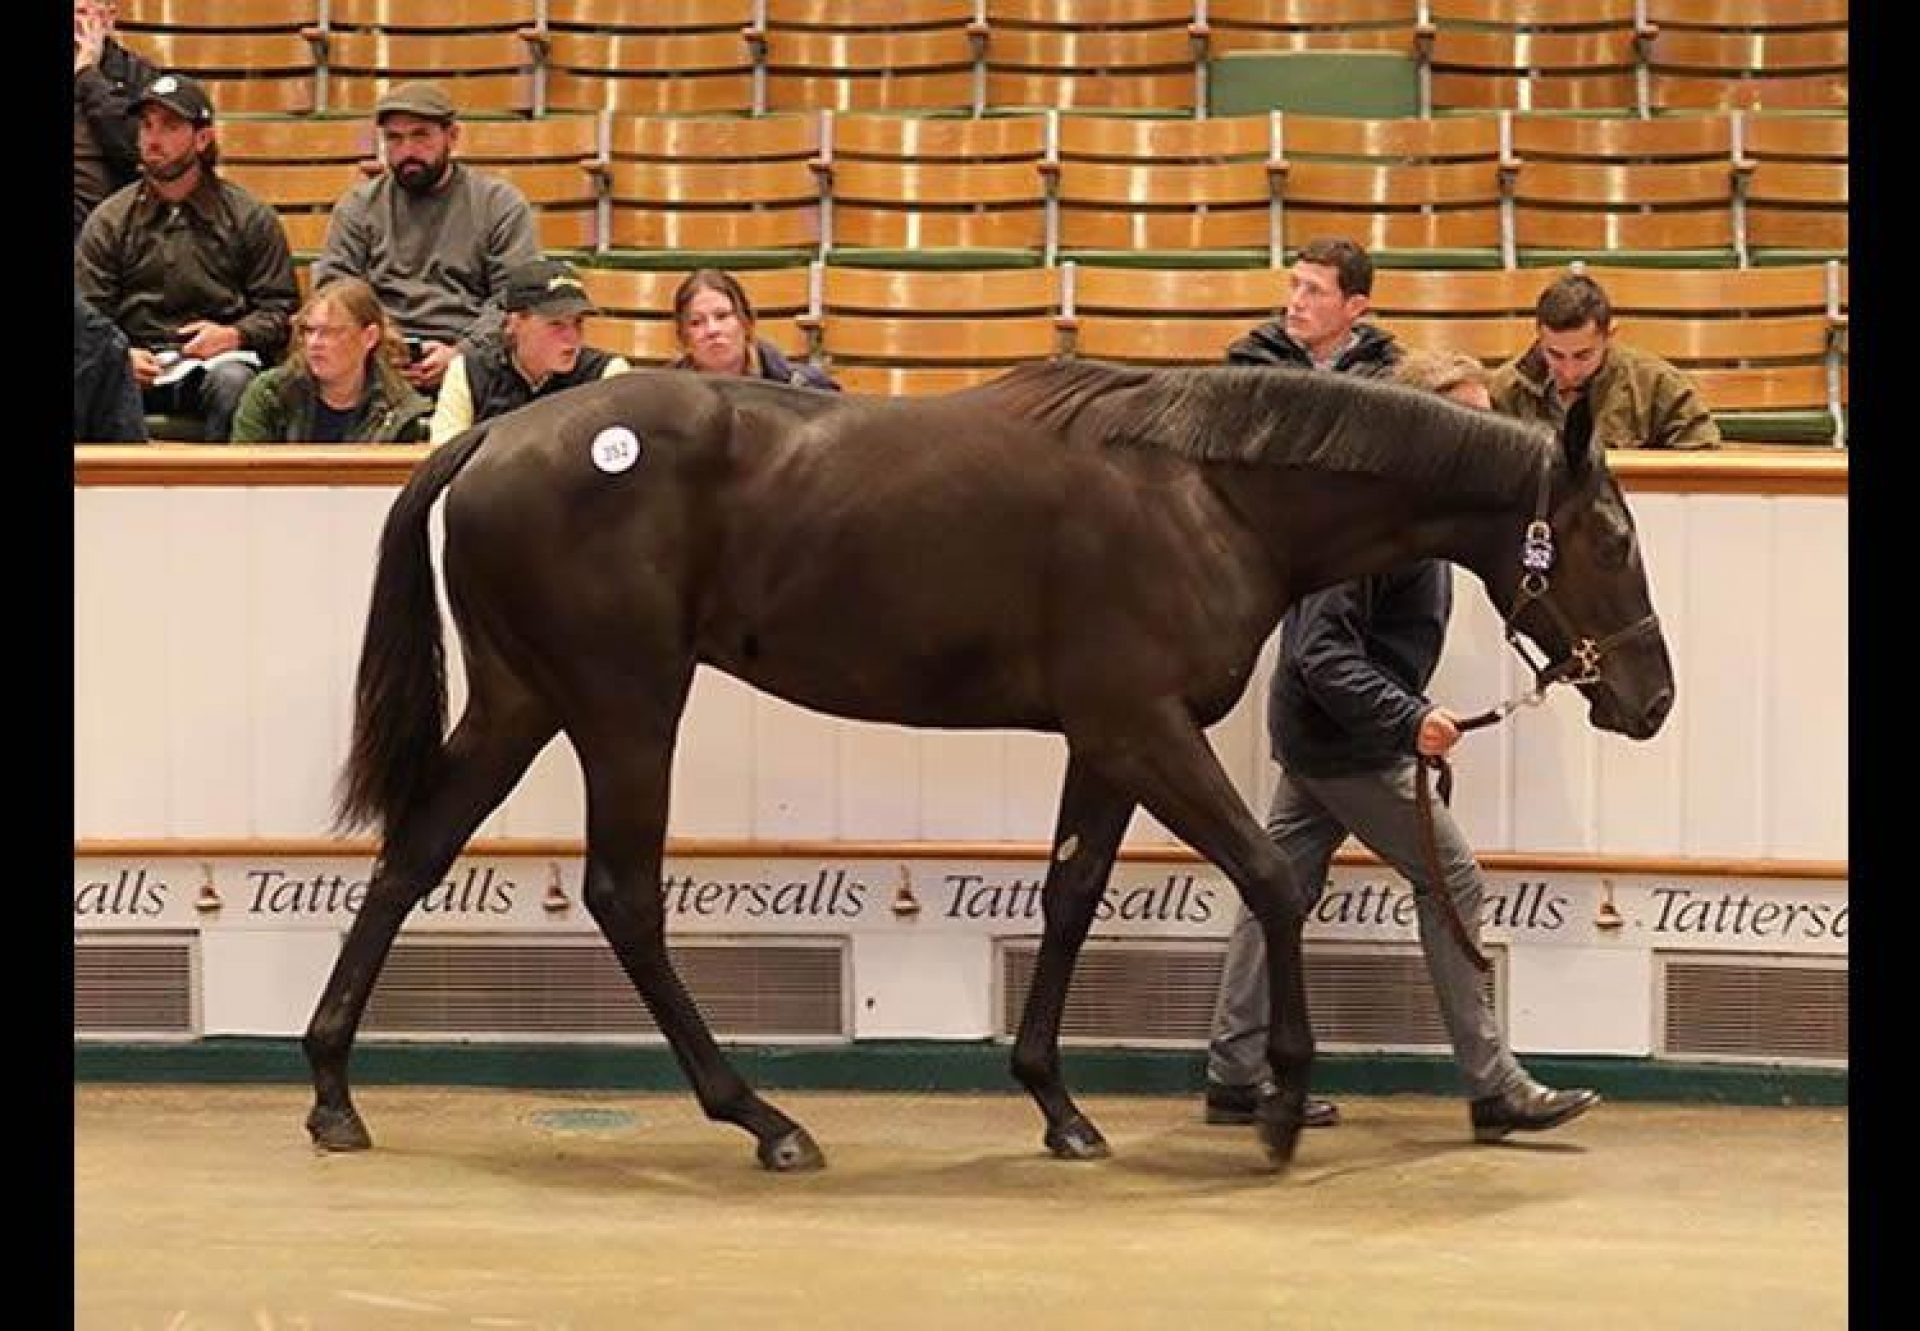 Wootton Bassett X Entreat Colt selling for 1.25 million guineas at Tattersalls